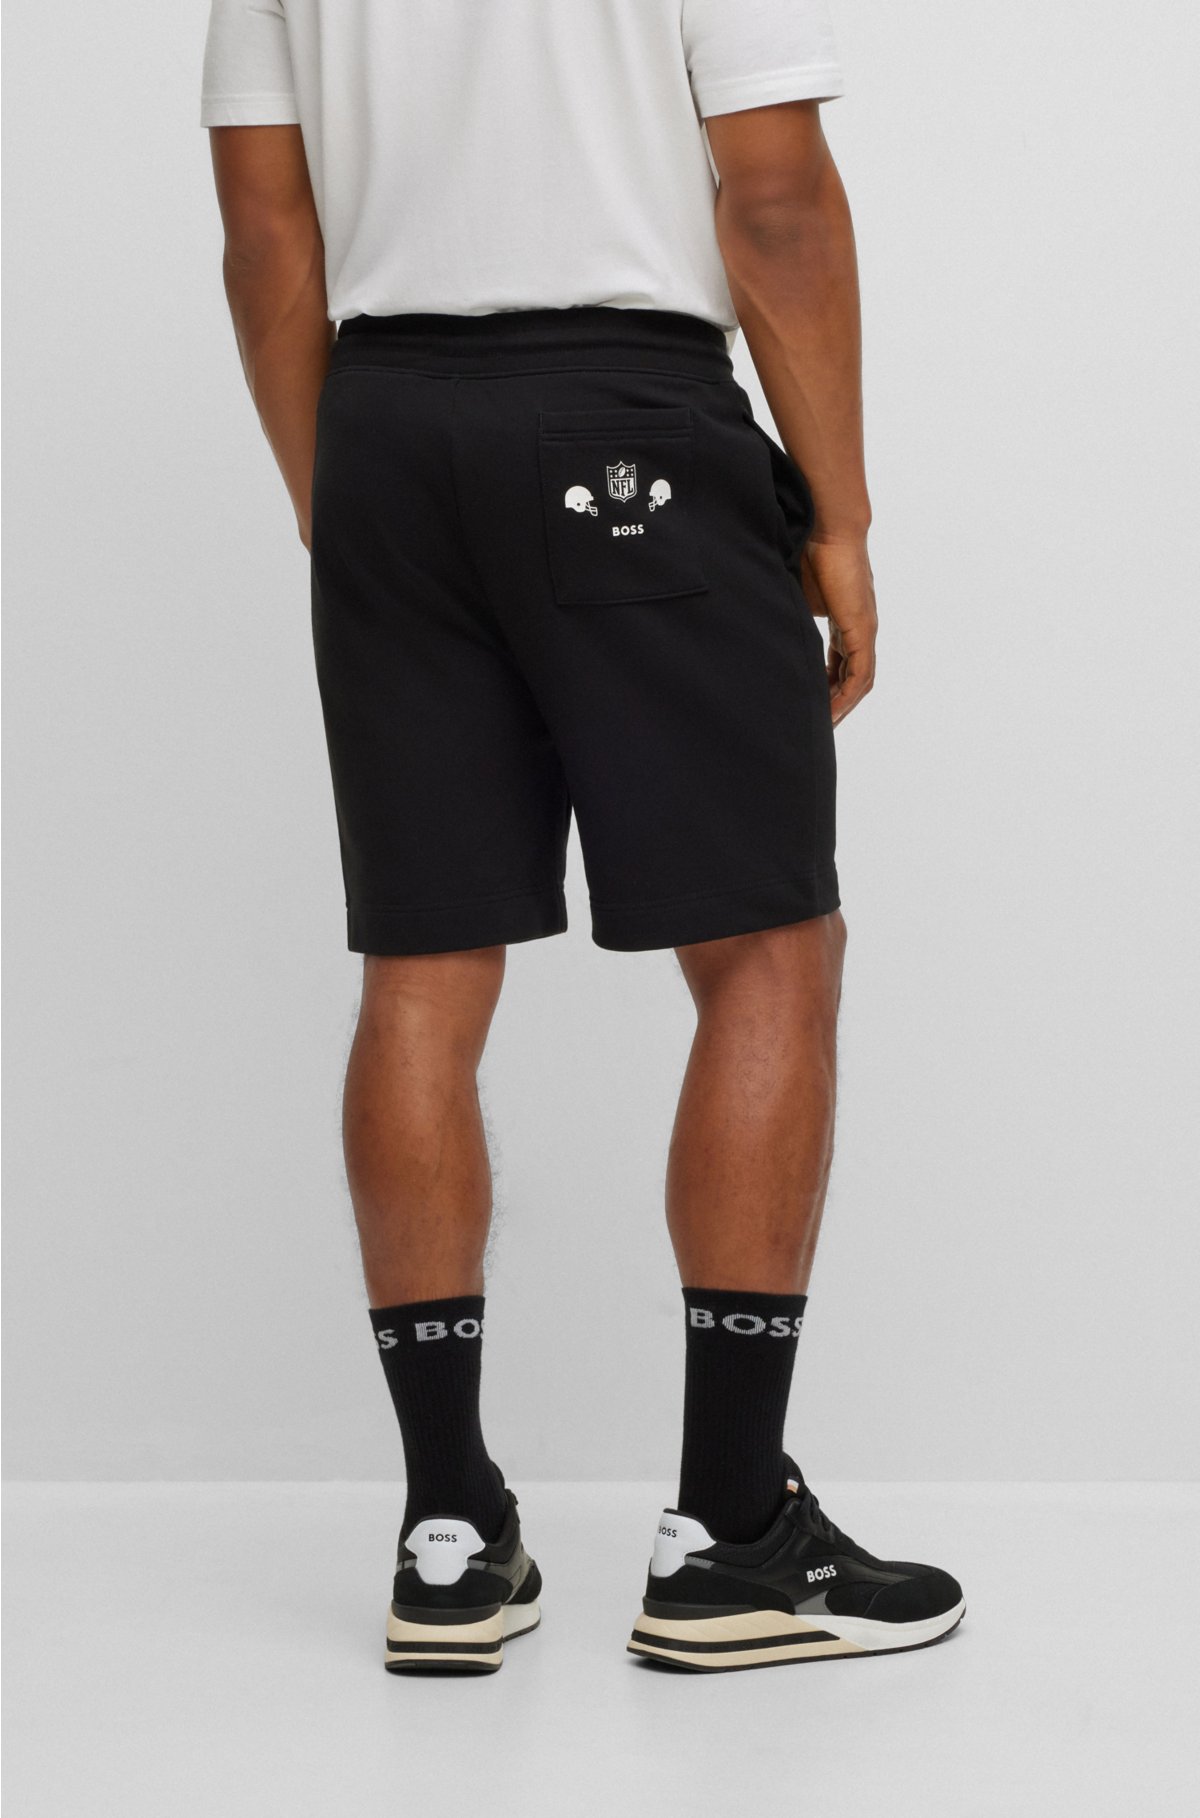 BOSS x NFL cotton-terry shorts with collaborative branding, Giants